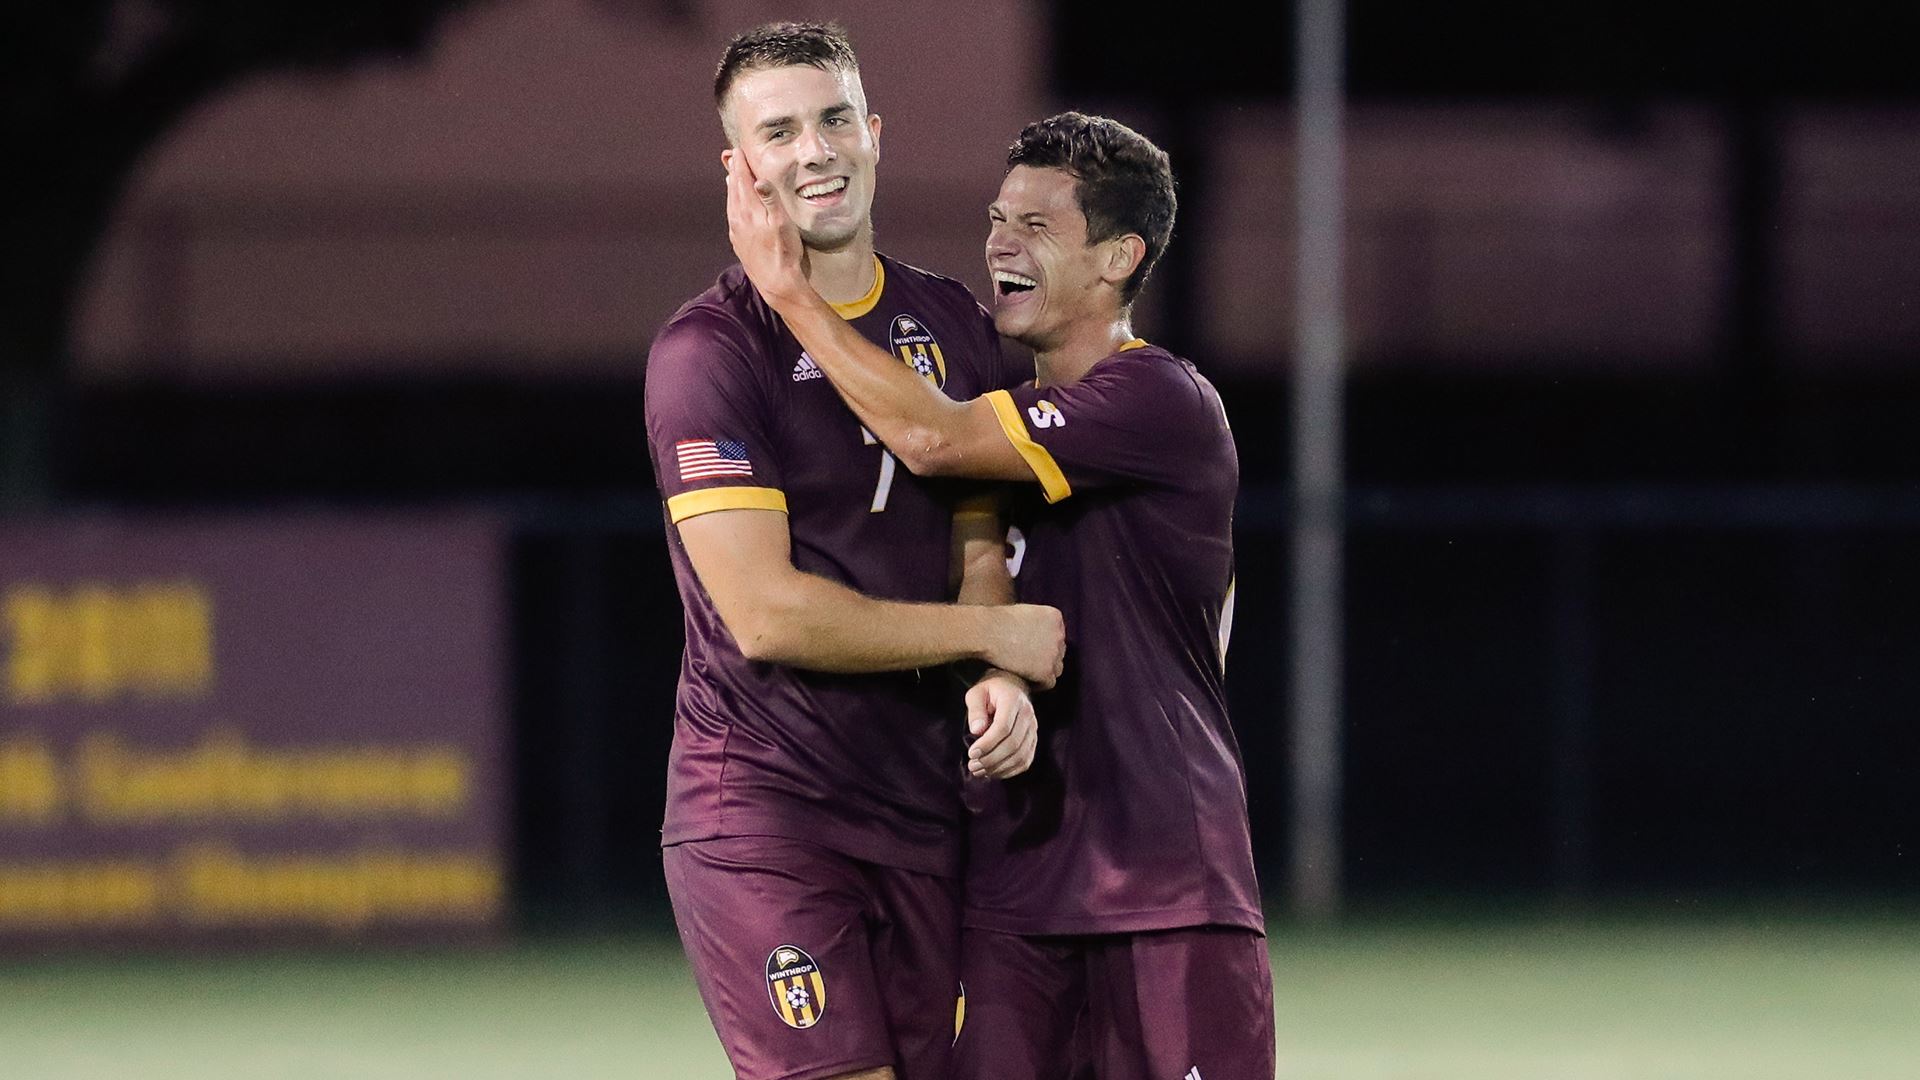 Winthrop Soccer makes the Big South Playoffs for the first time since 2015